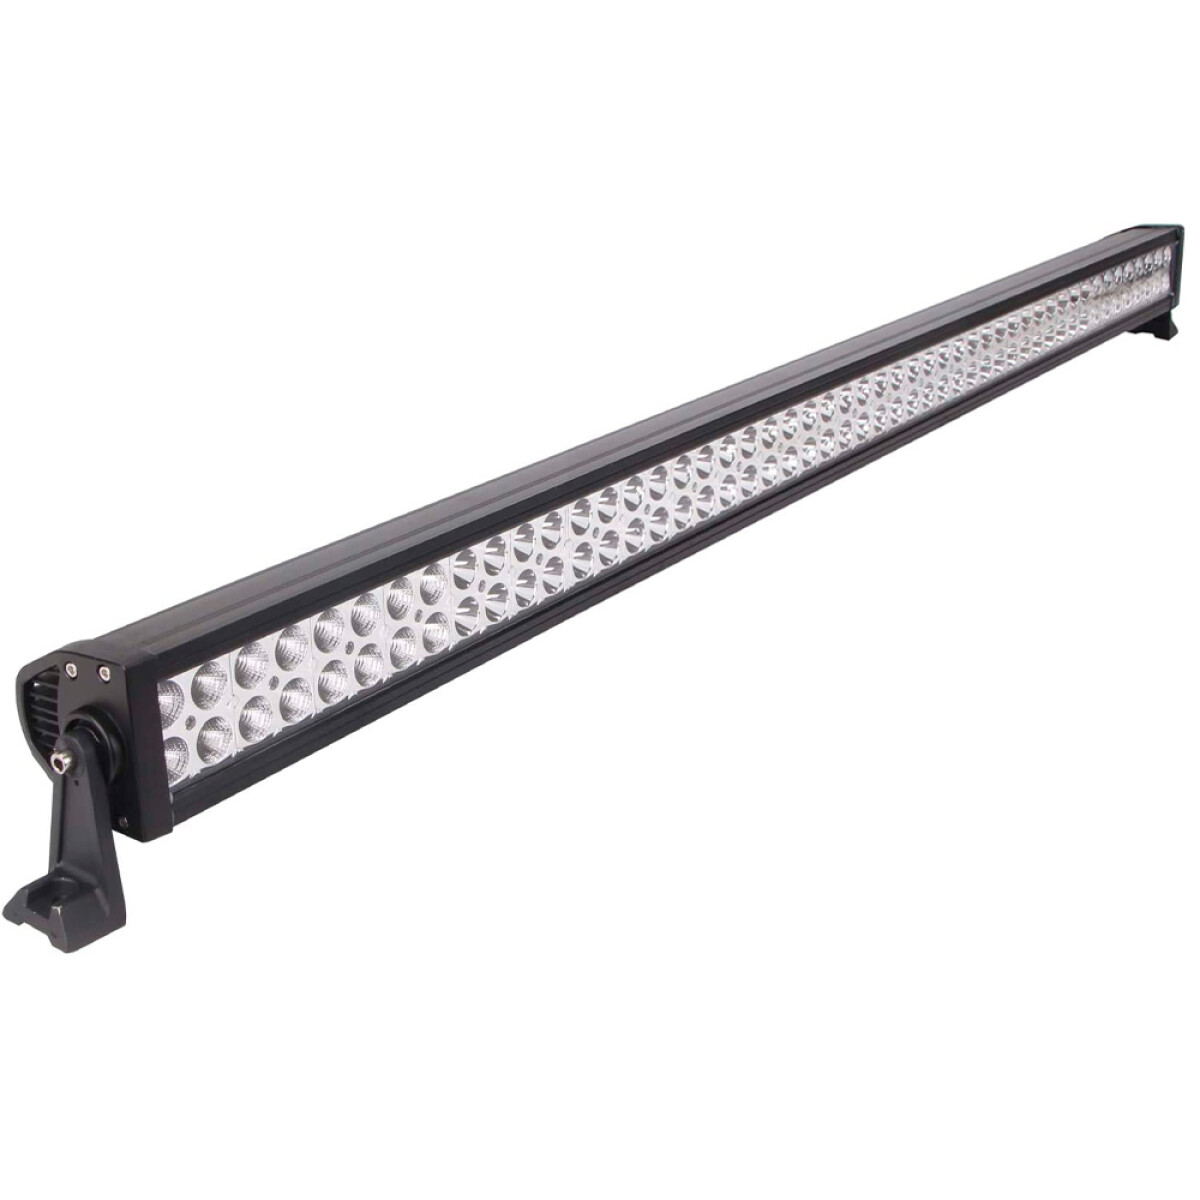 FARO LED - BARRAL LUCES 300W 1295MM 20000LM - 